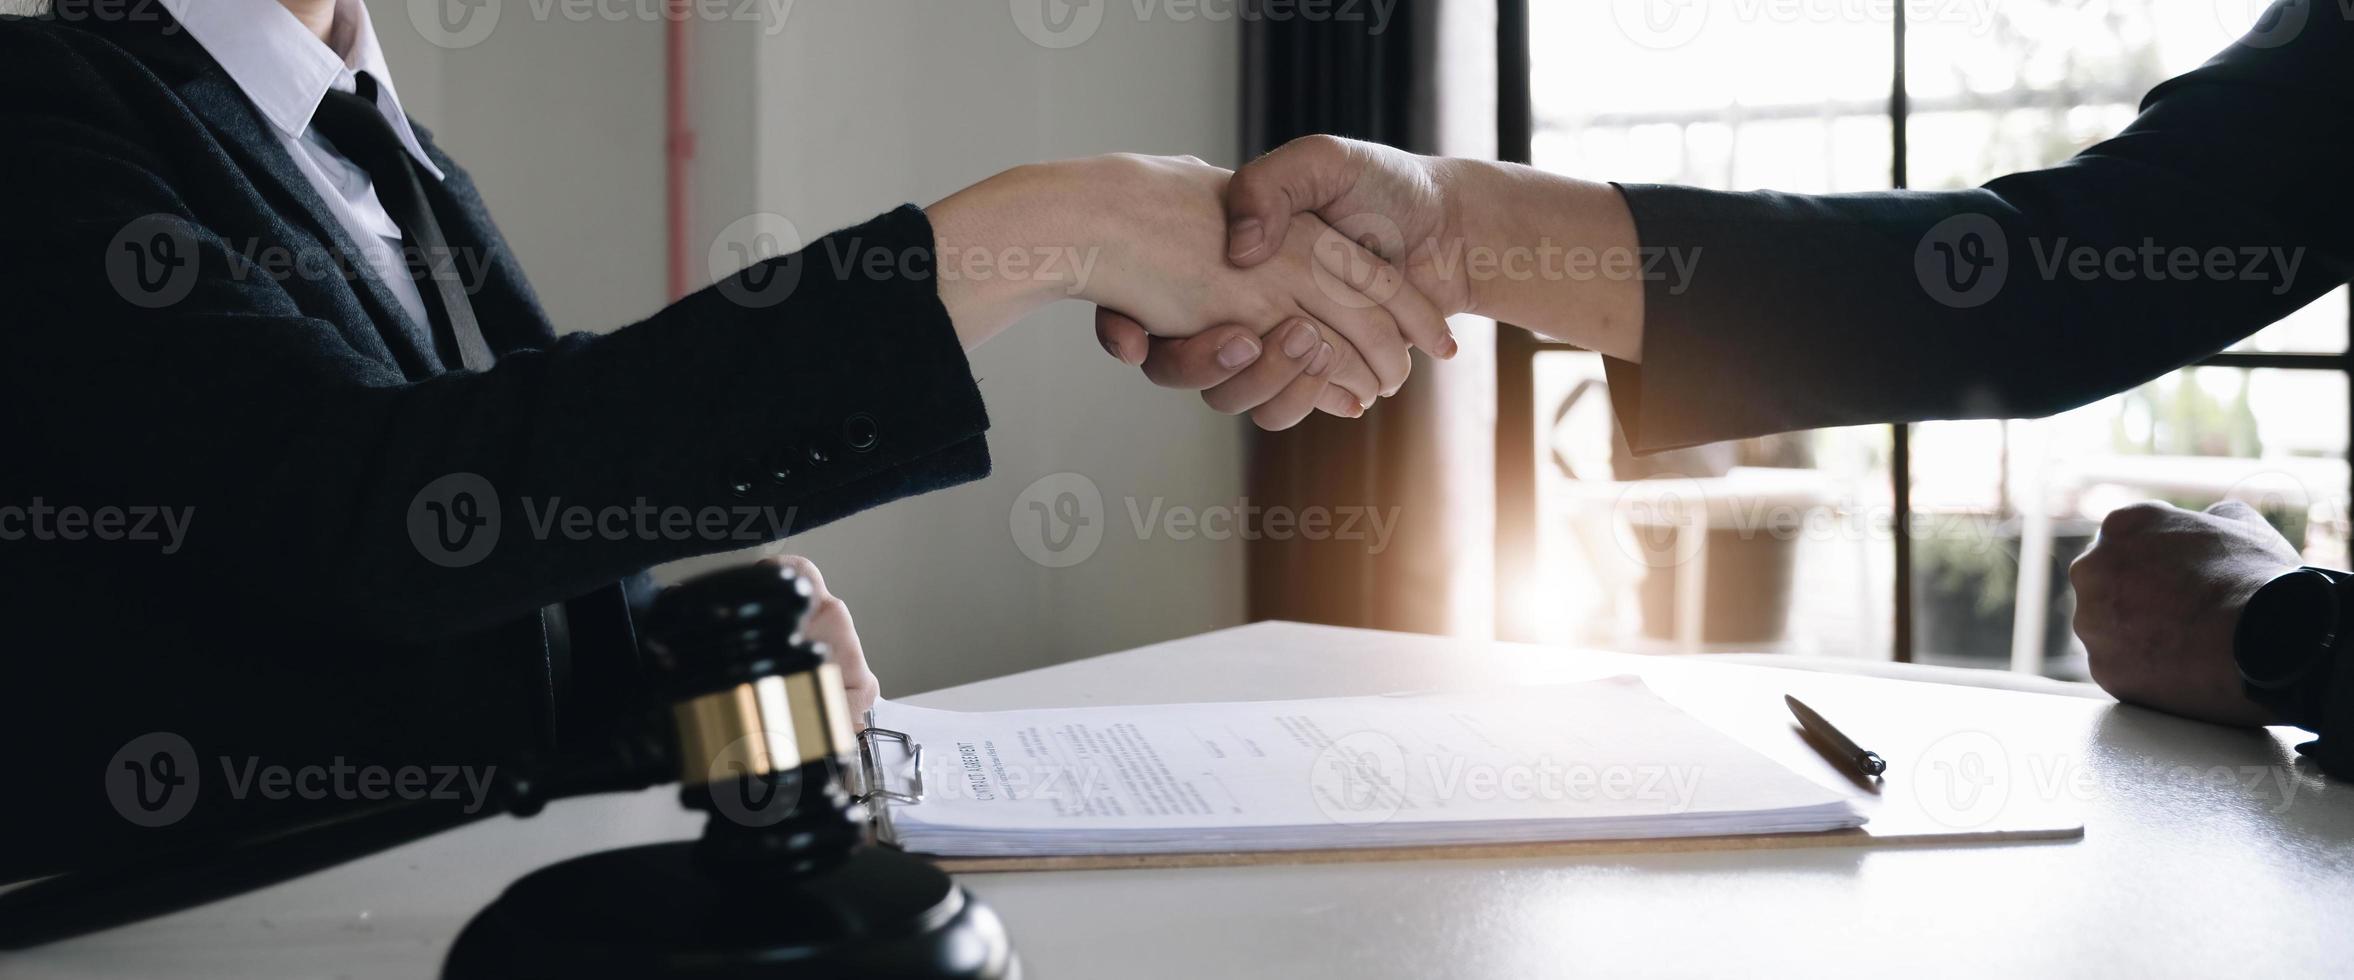 Good service cooperation of Consultation between a male lawyer and business woman customer, Handshake after good deal agreement, Law and Legal concept. photo